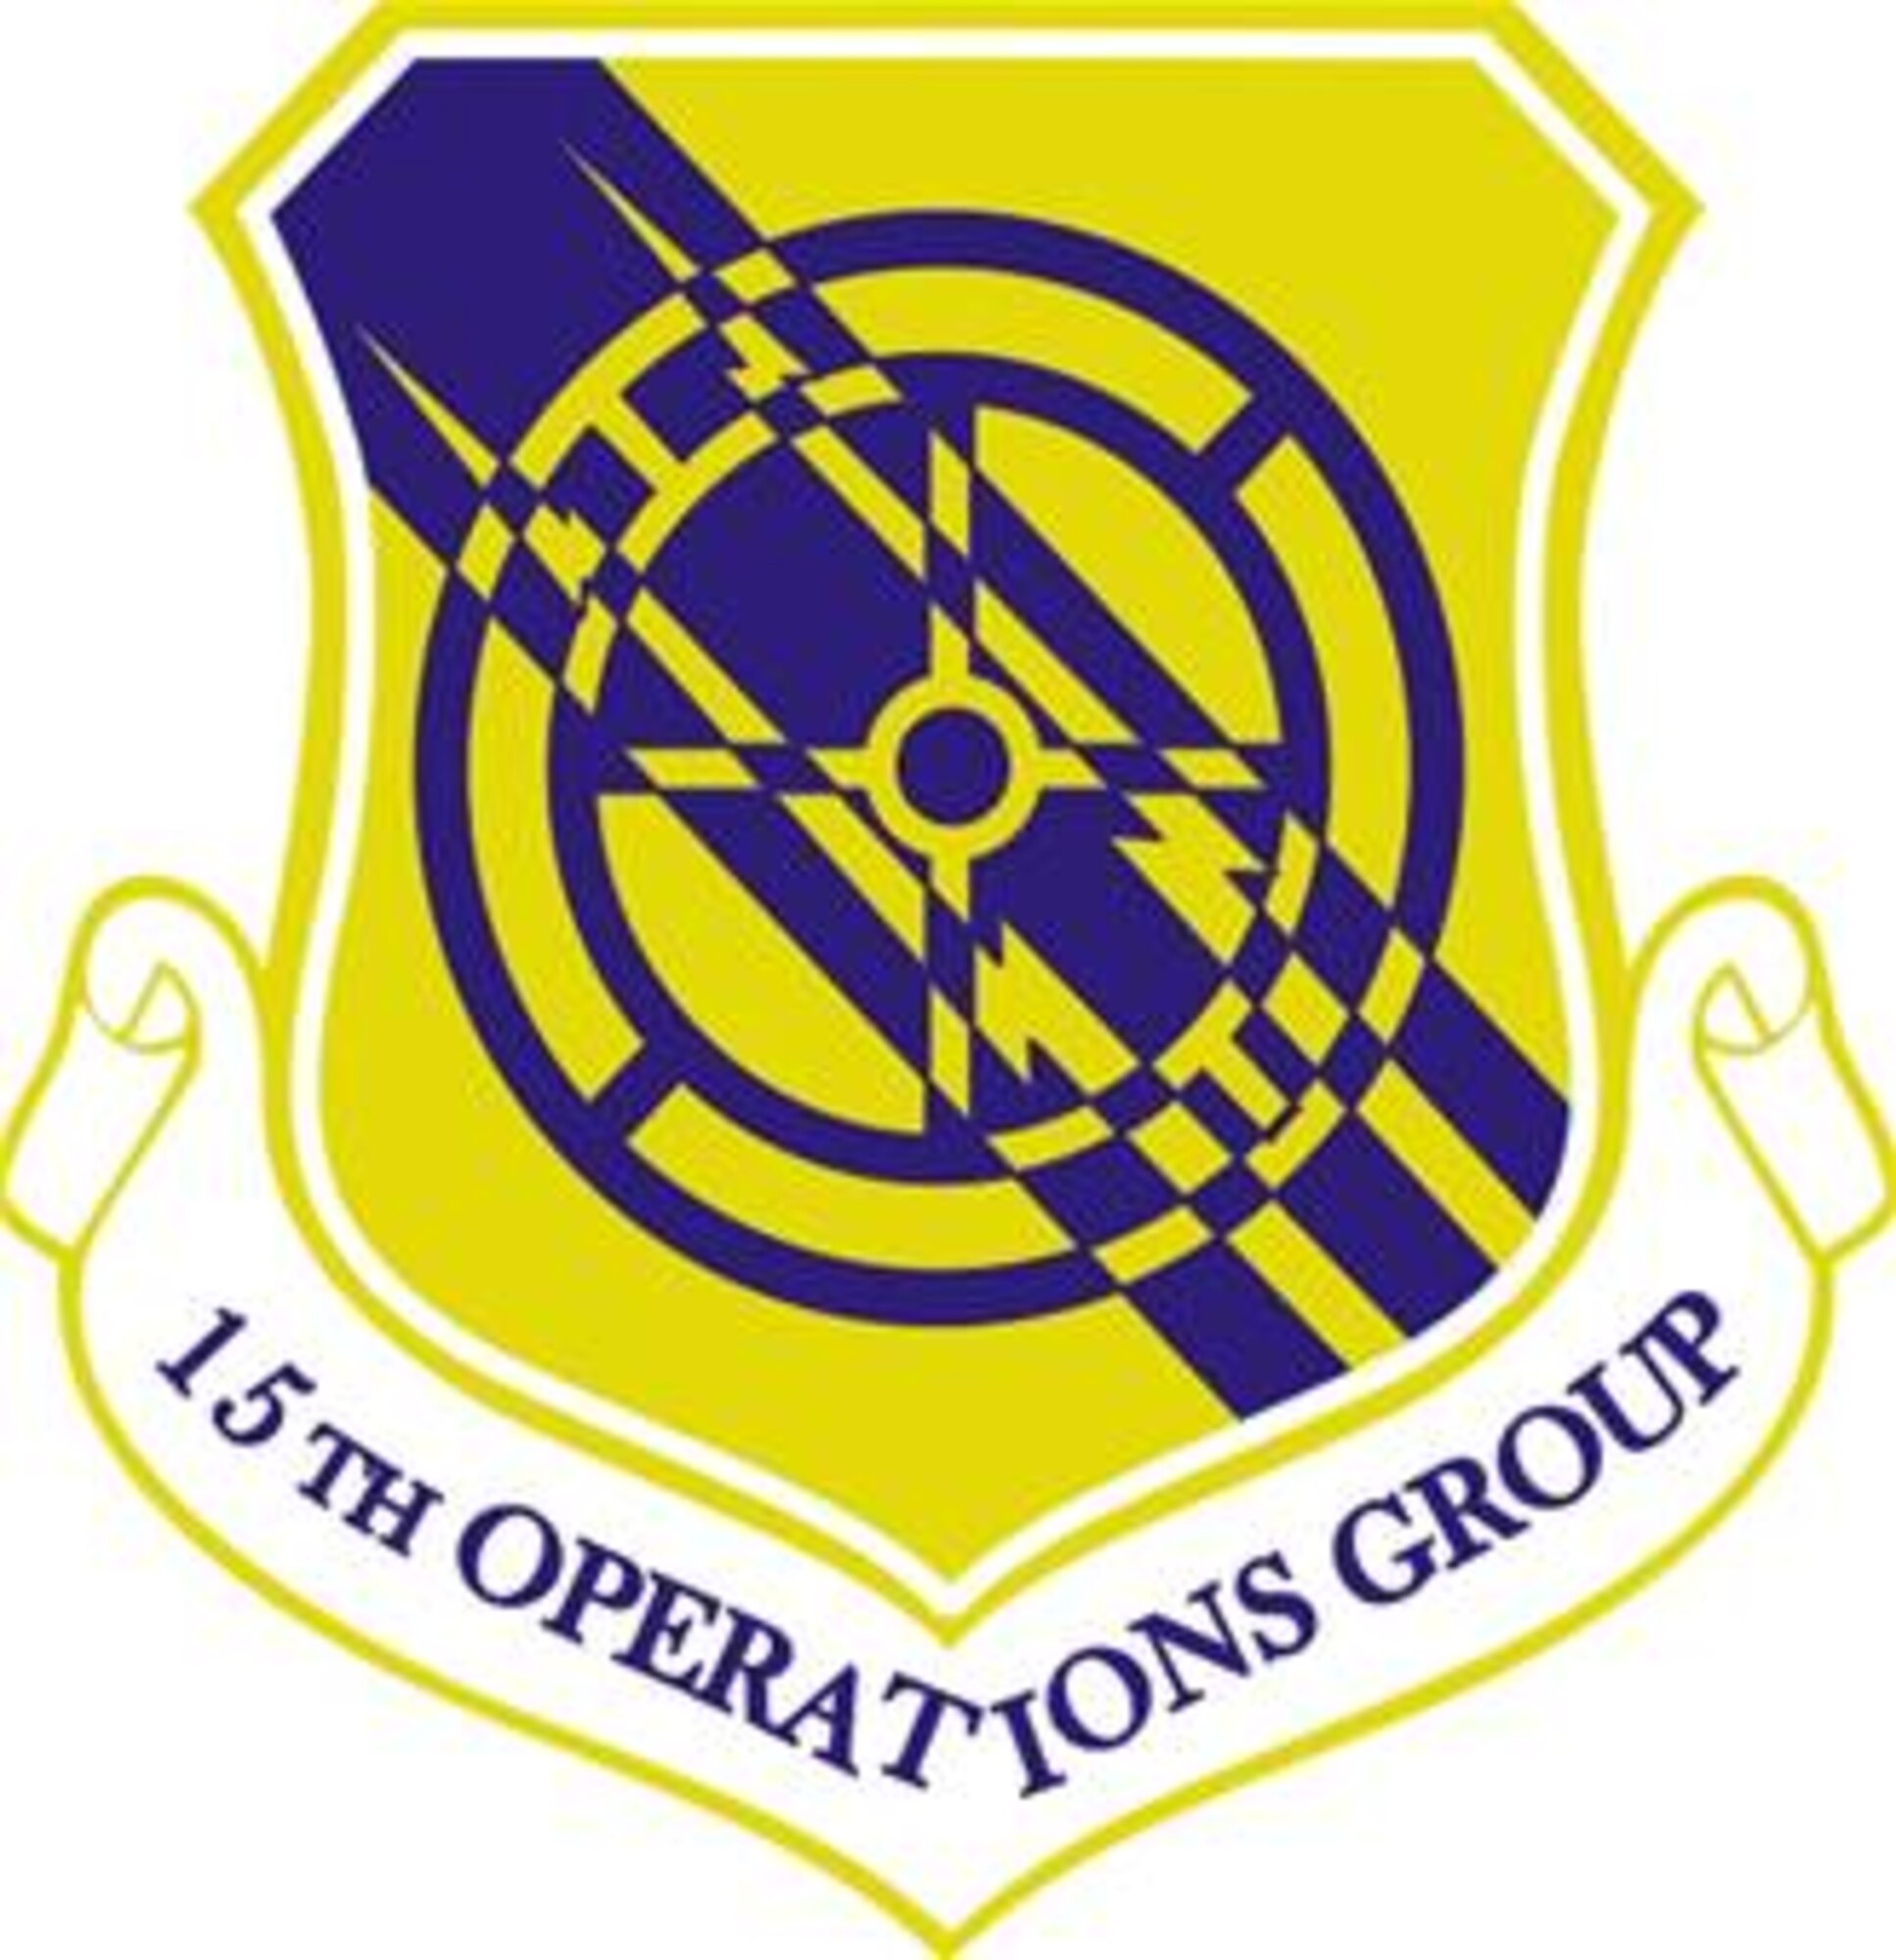 15th Operations Group Shield